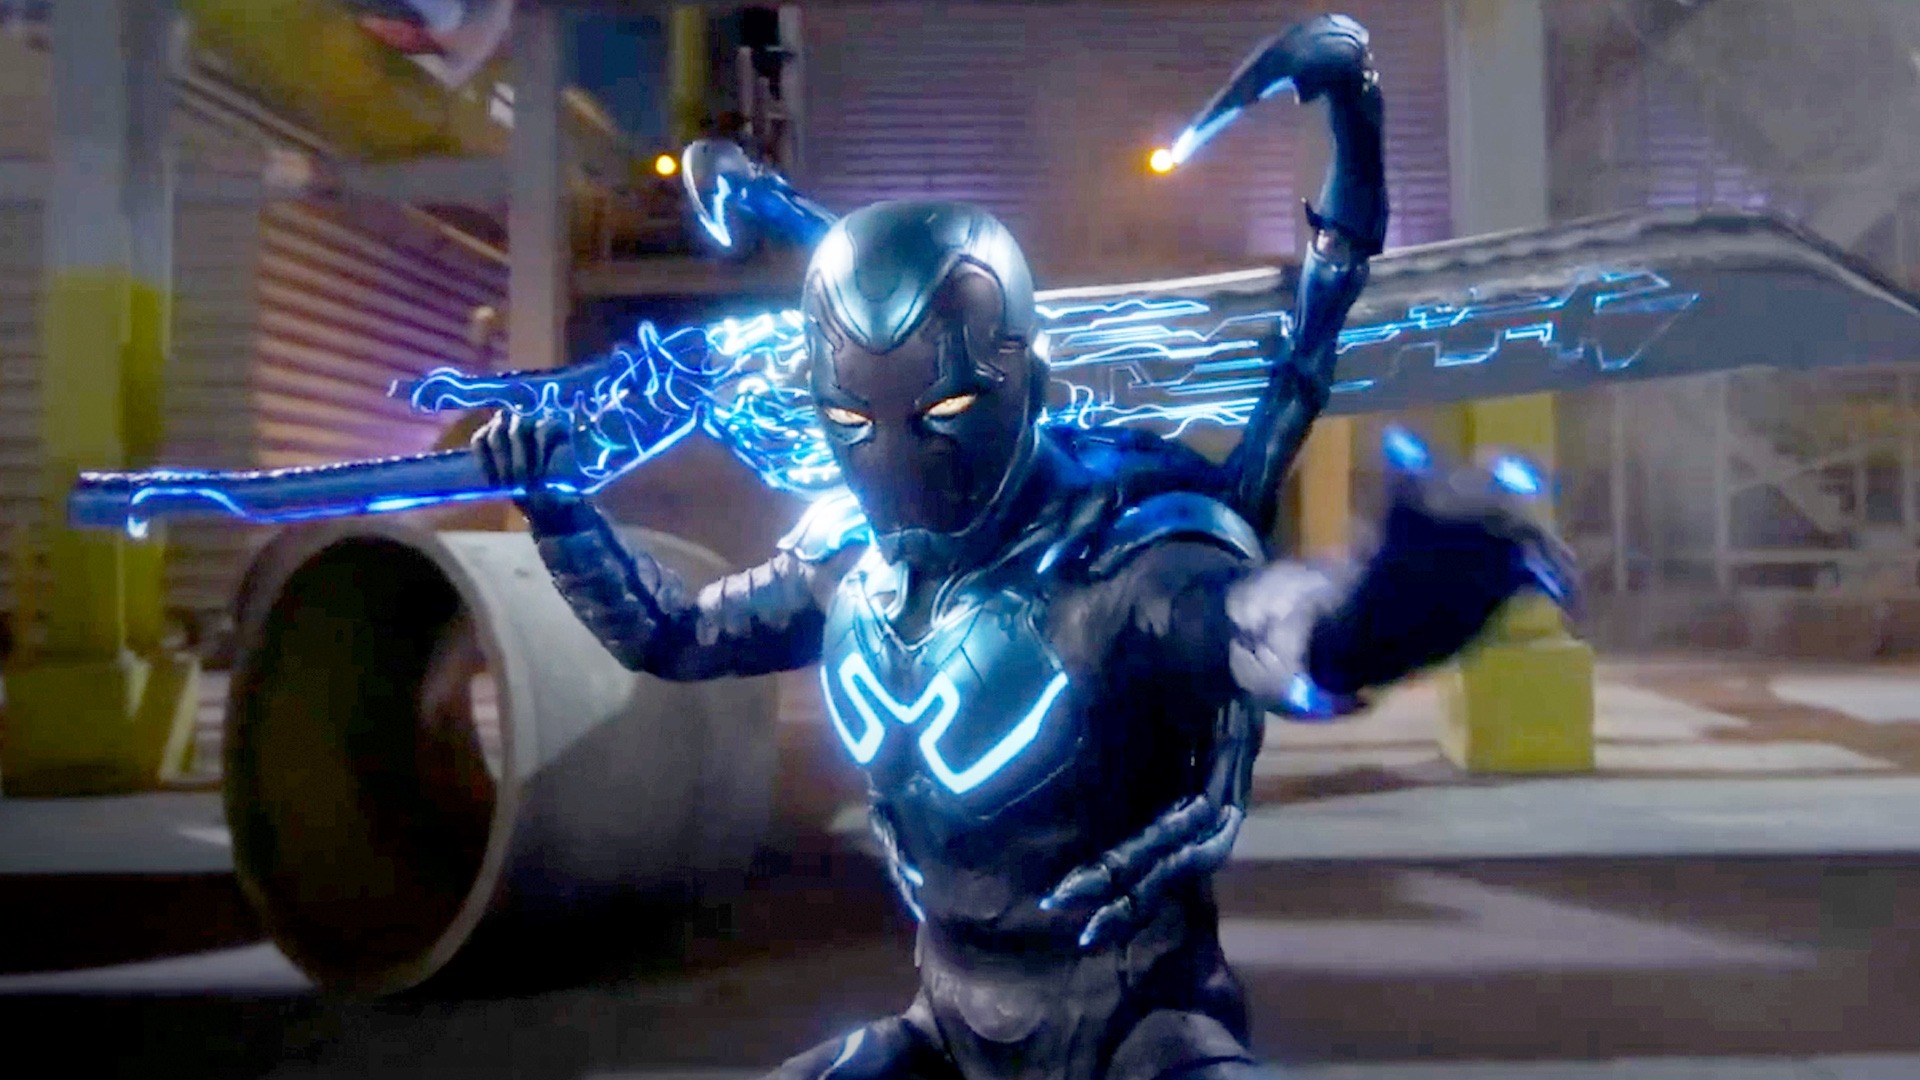 Blue Beetle Rotten Tomatoes Score and Tomatometer REVEALED!